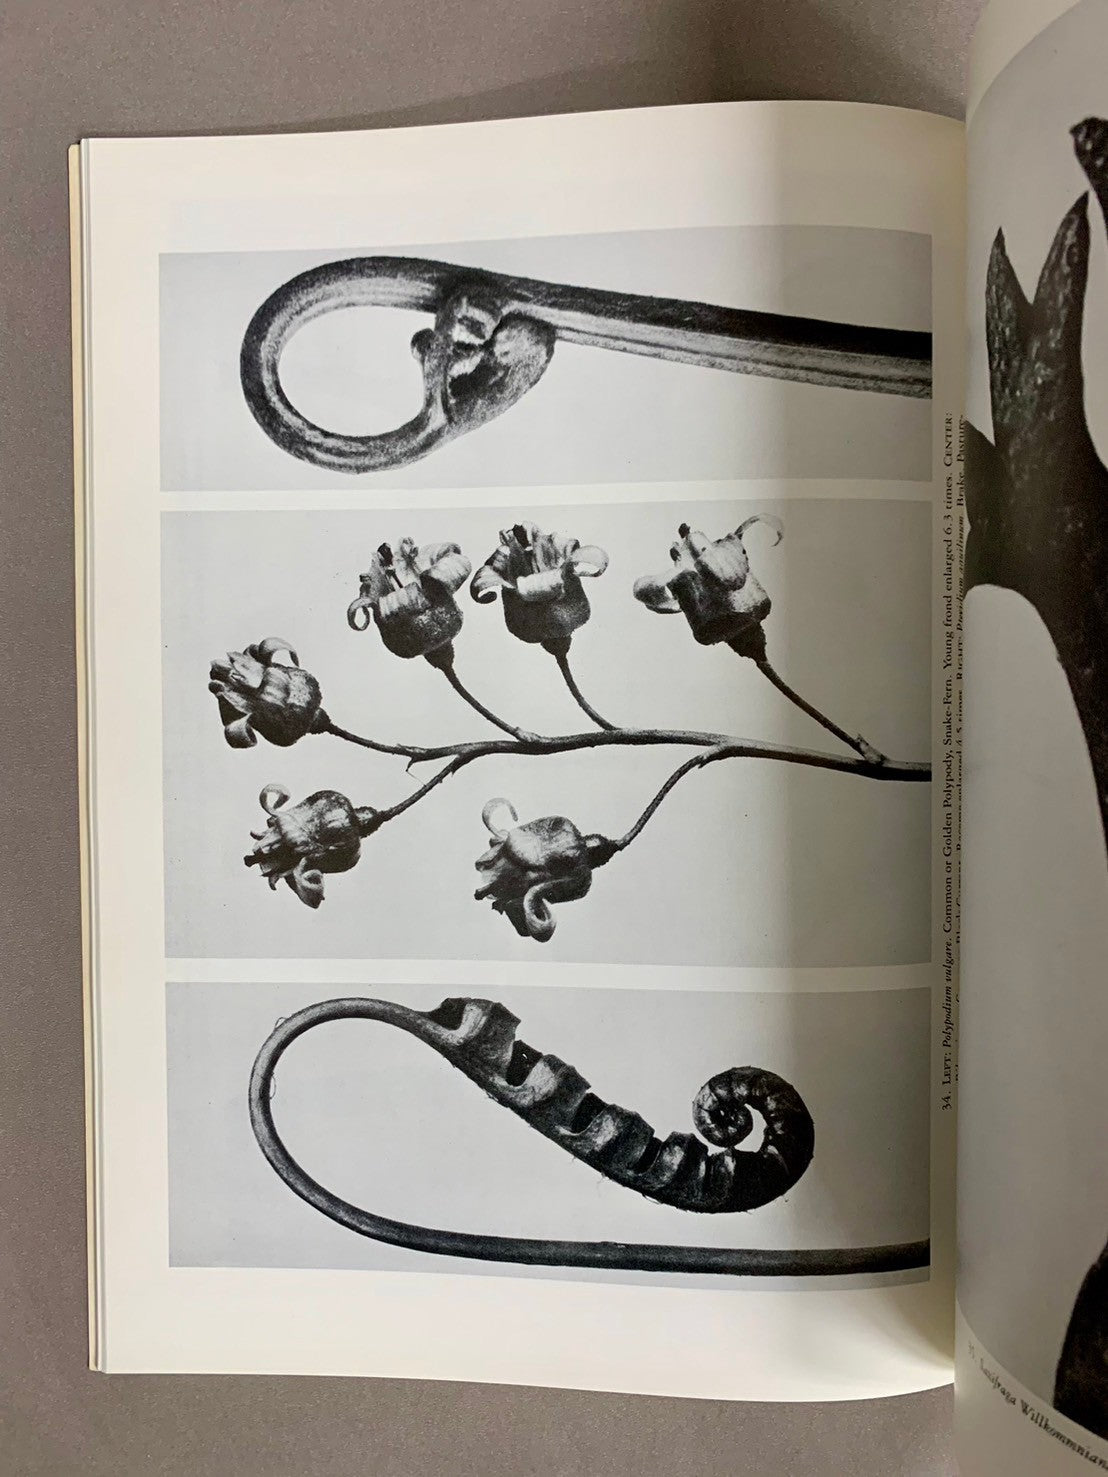 ART FORMS IN THE PLANT WORLD　Karl Blossfeldt　カール・ブロスフェル　洋書